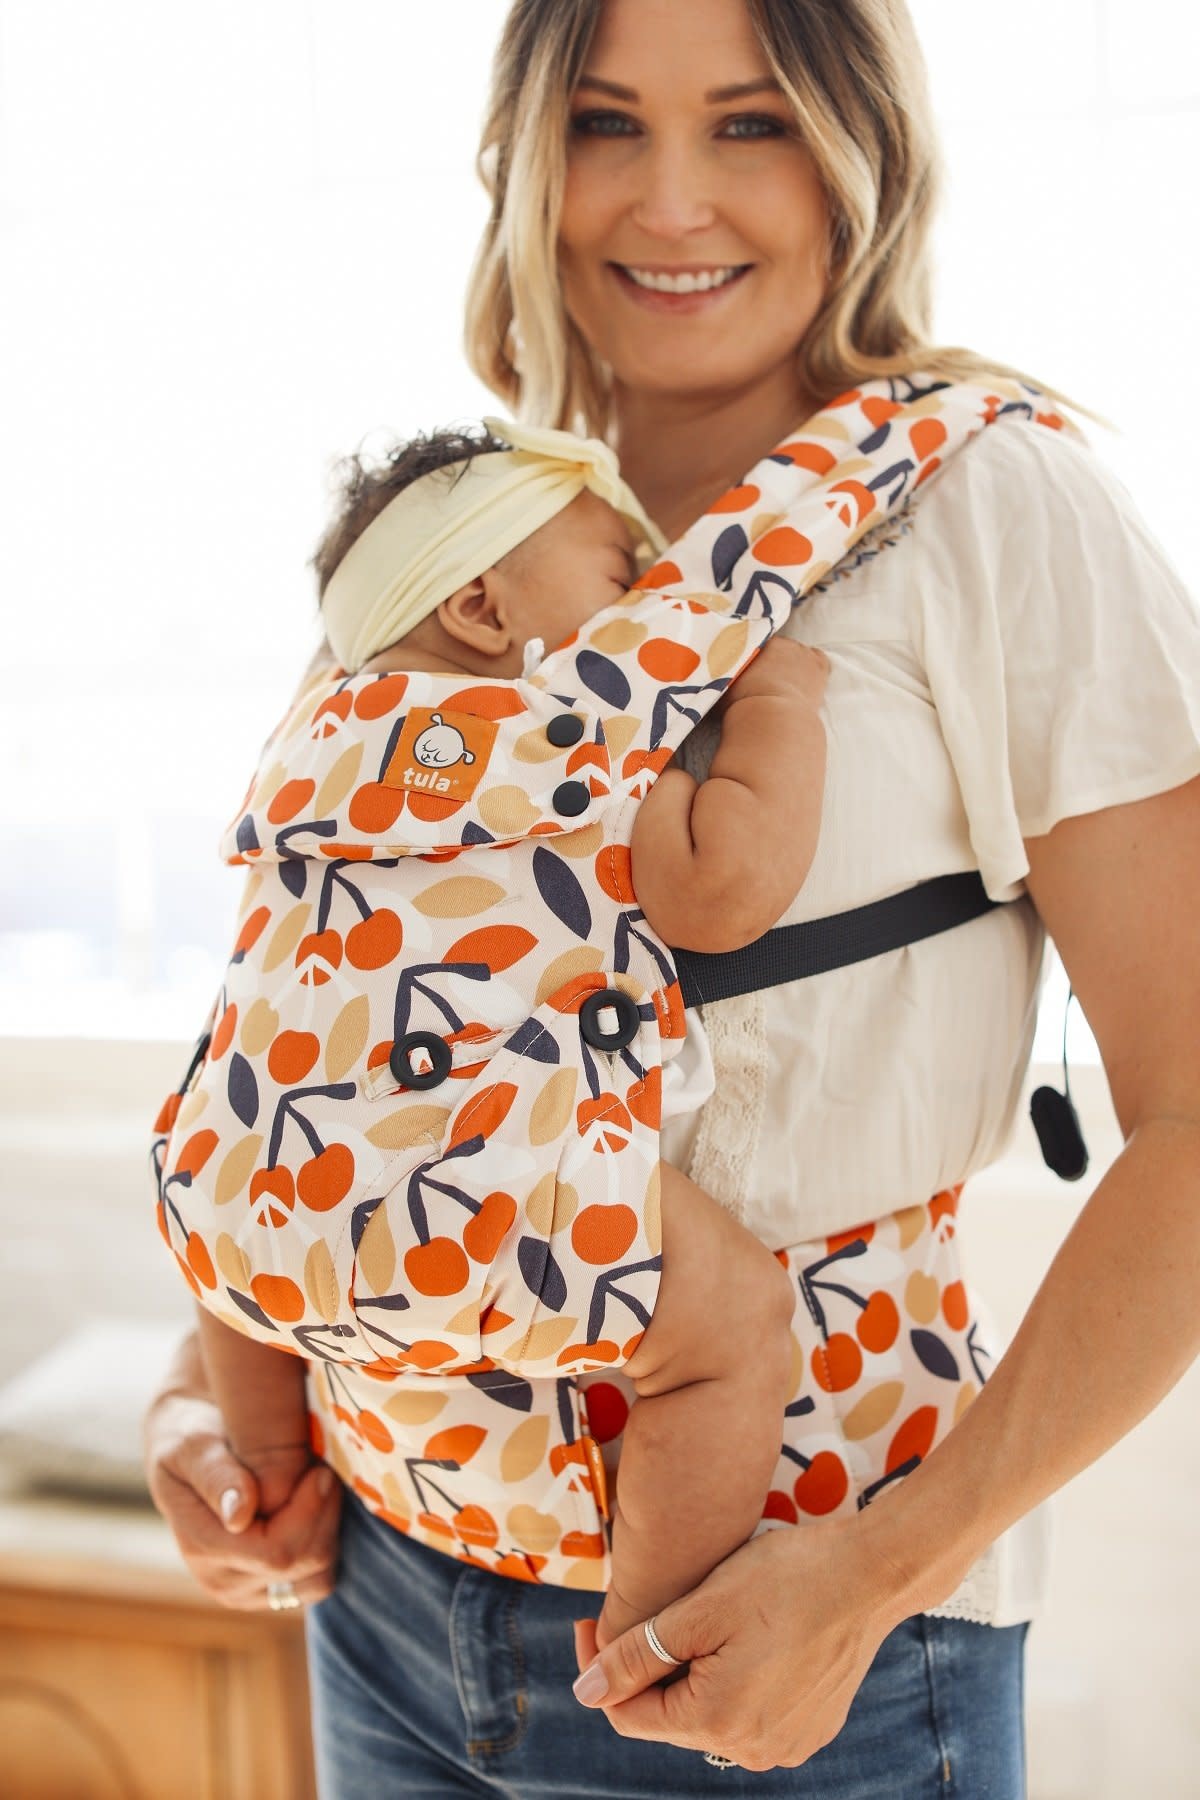 baby tula baby carriers